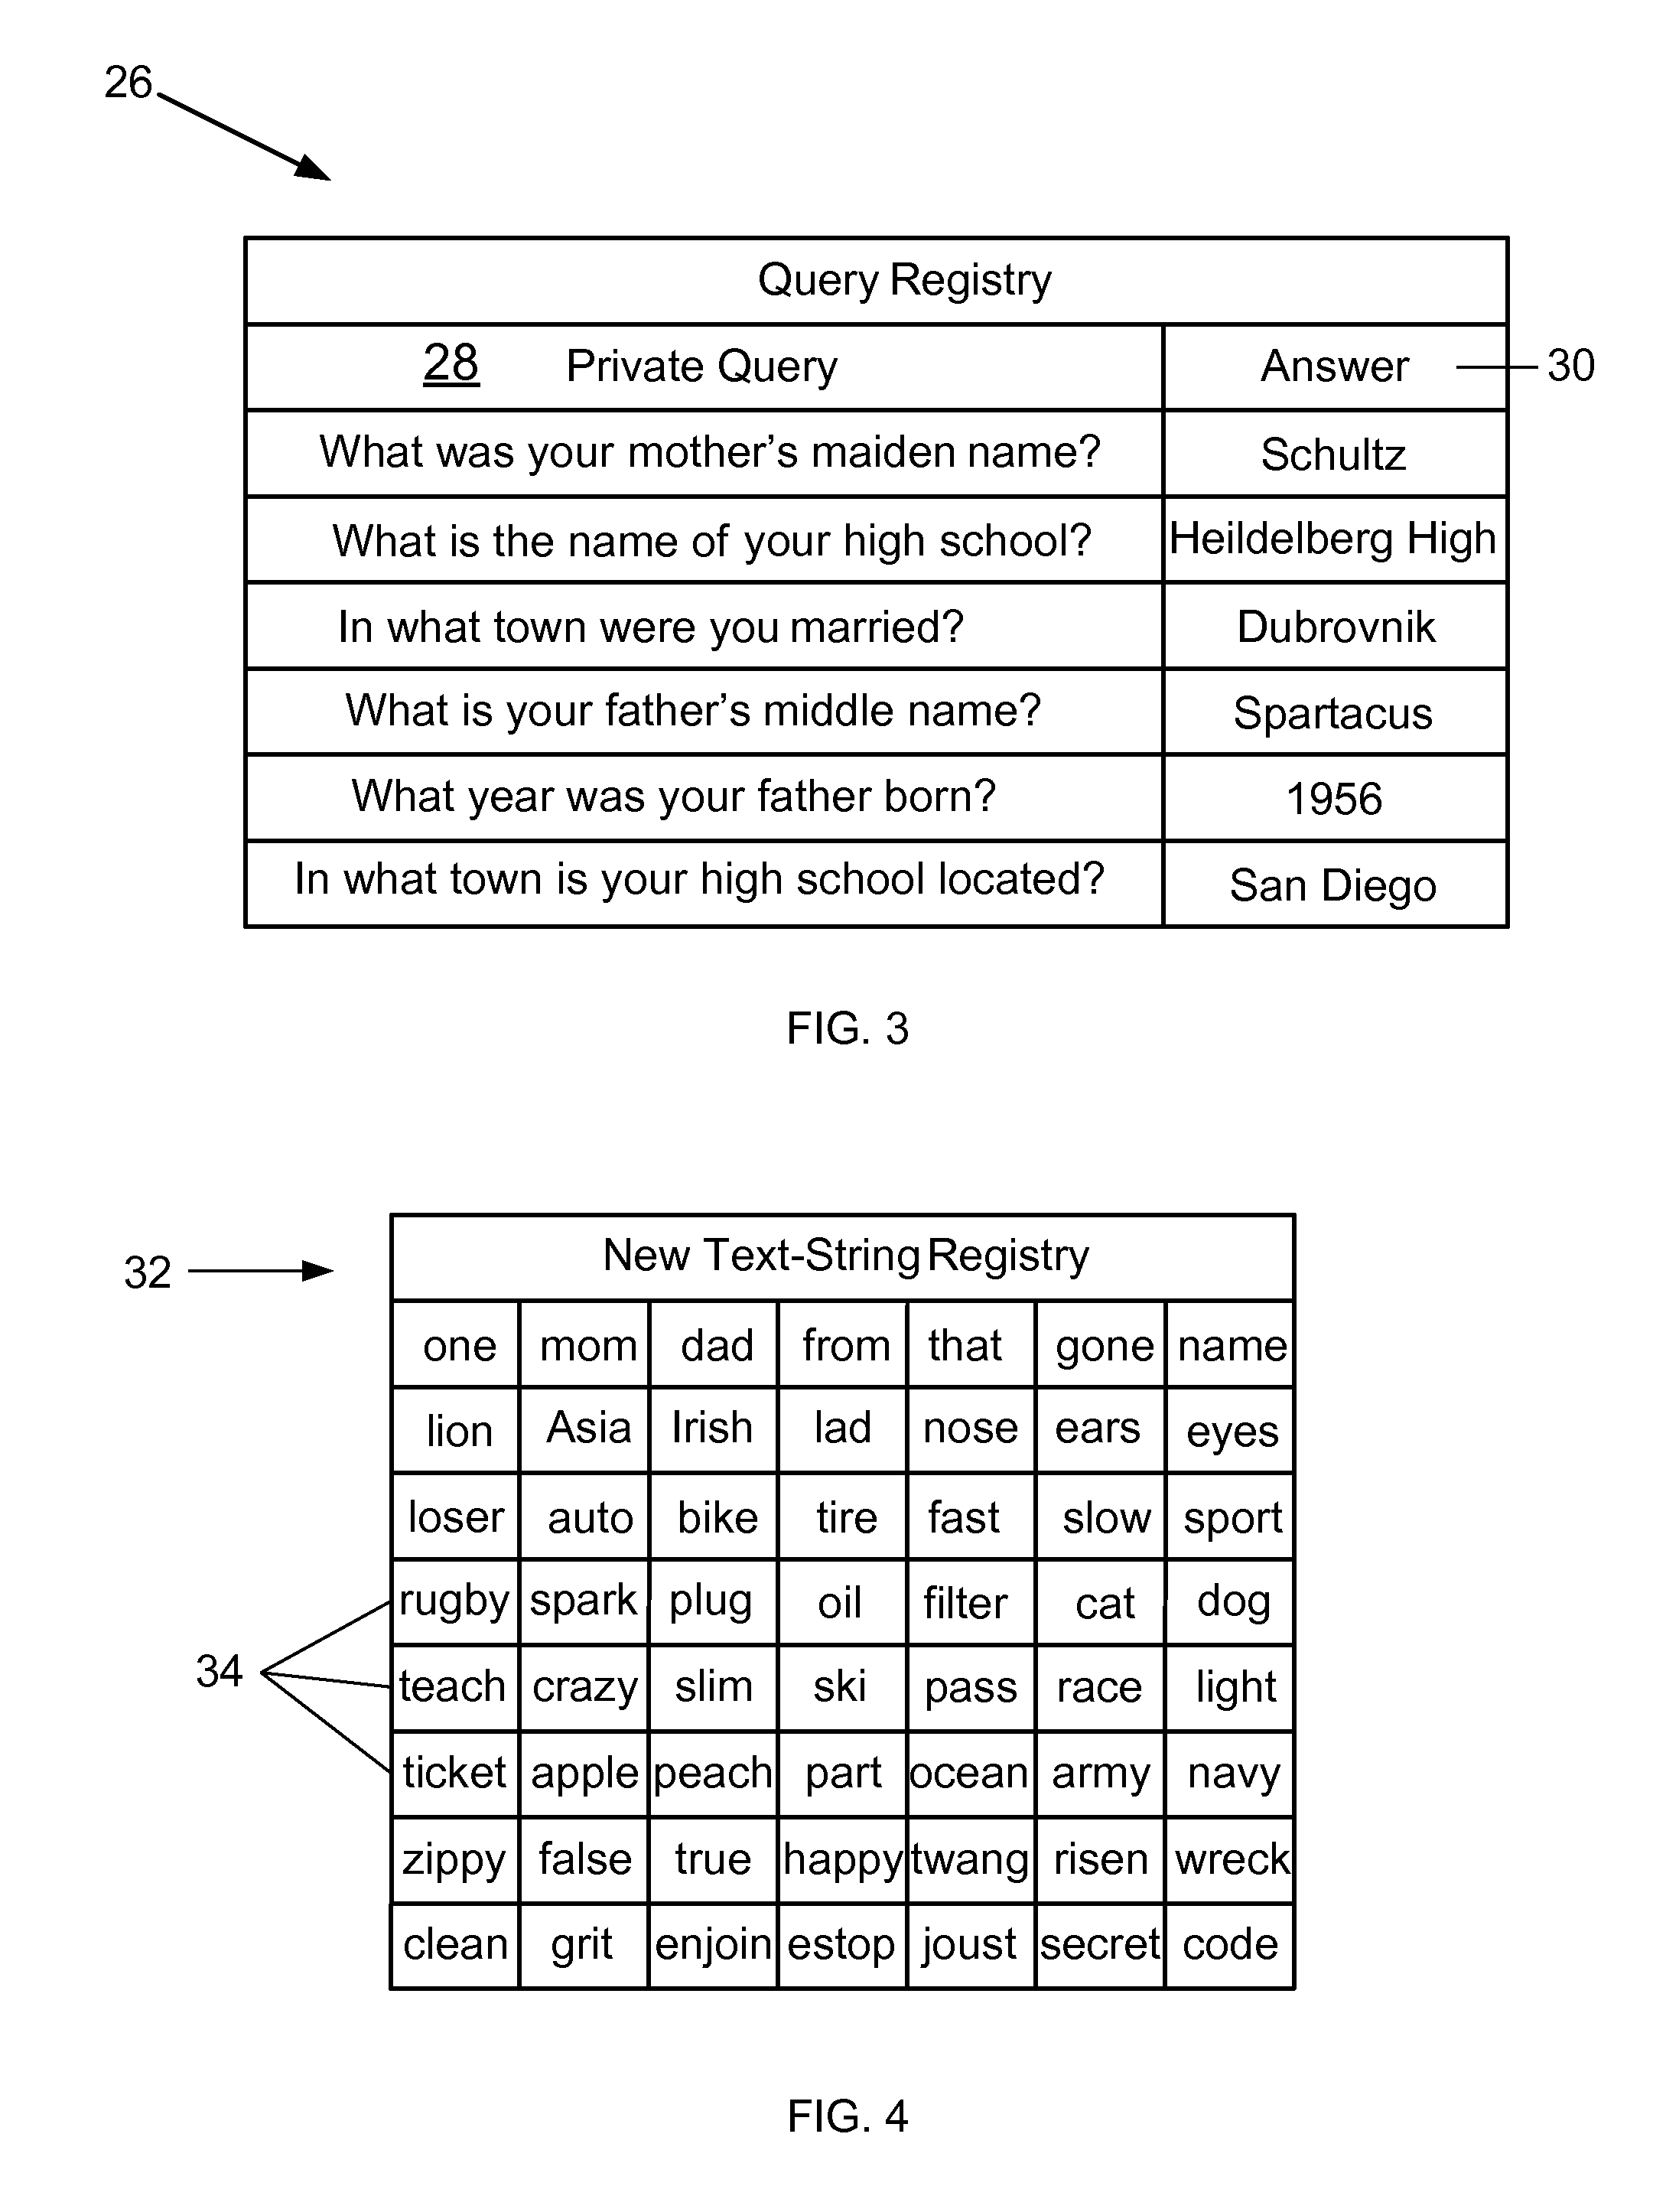 Methods and systems for improving the security of secret authentication data during authentication transactions